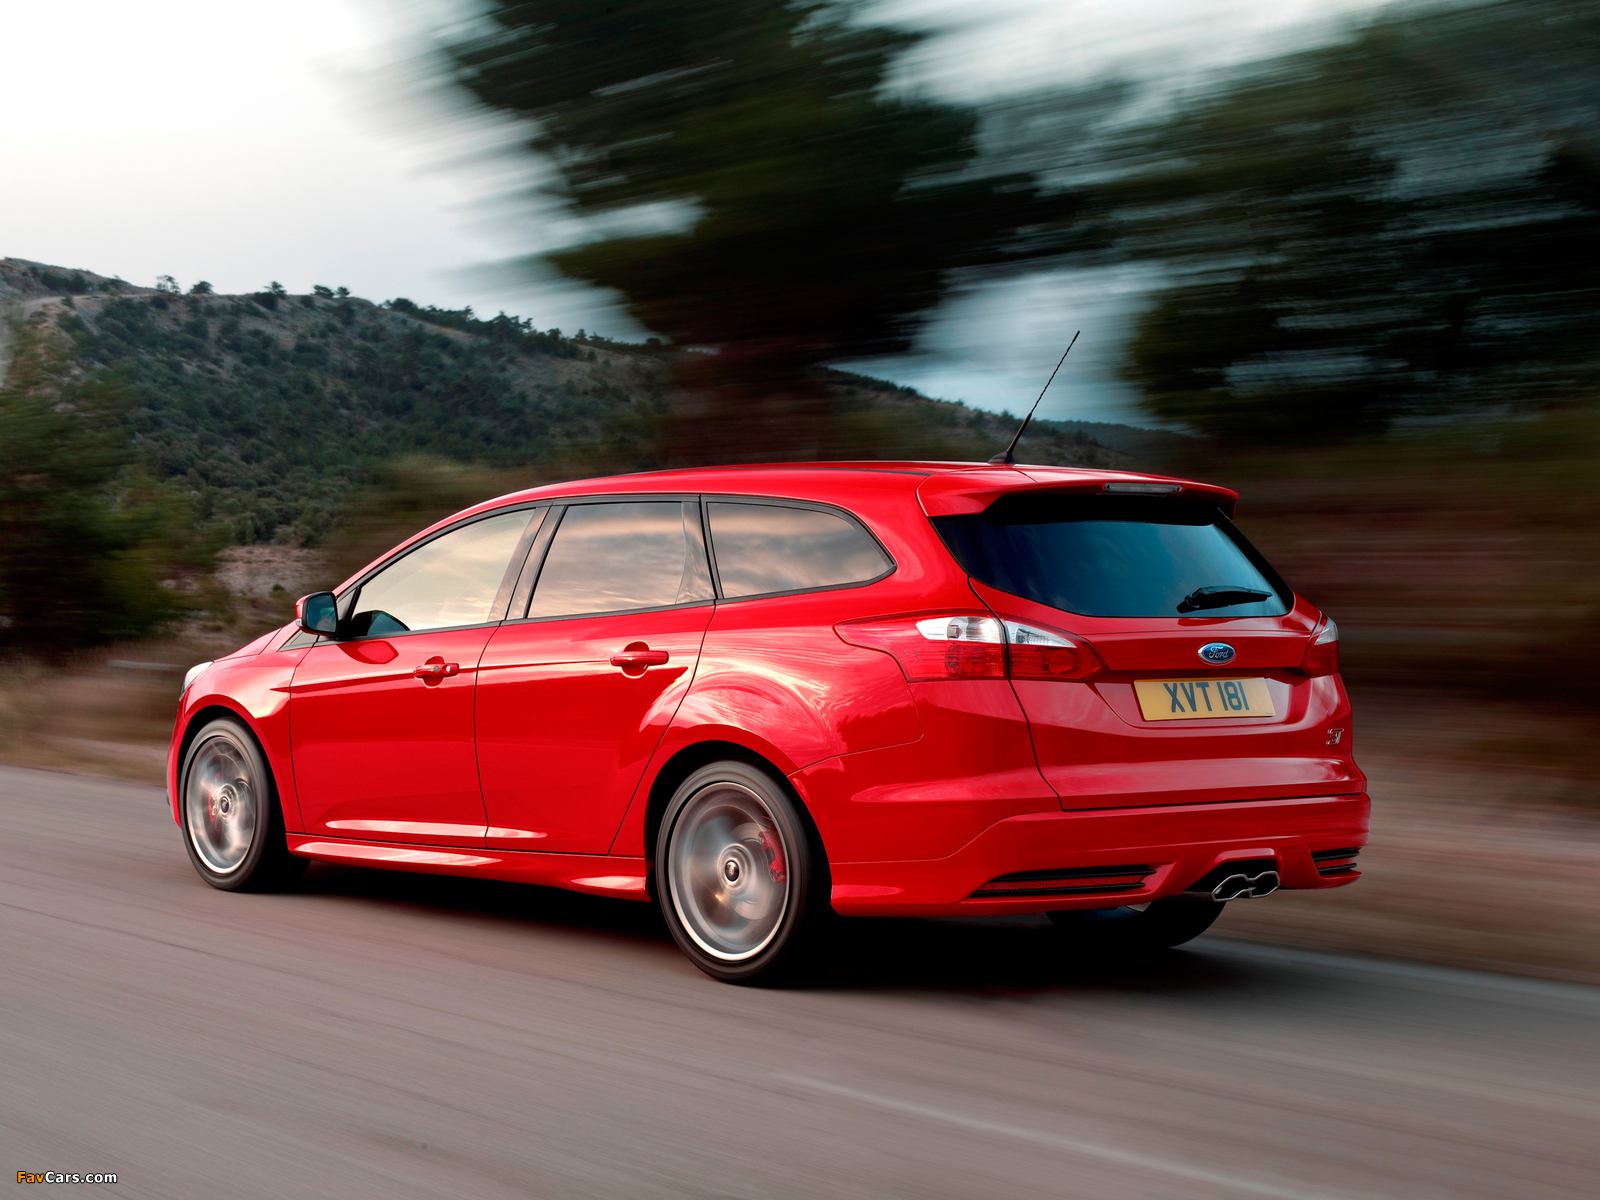 Ford Focus ST Wagon 2012 images (1600 x 1200)